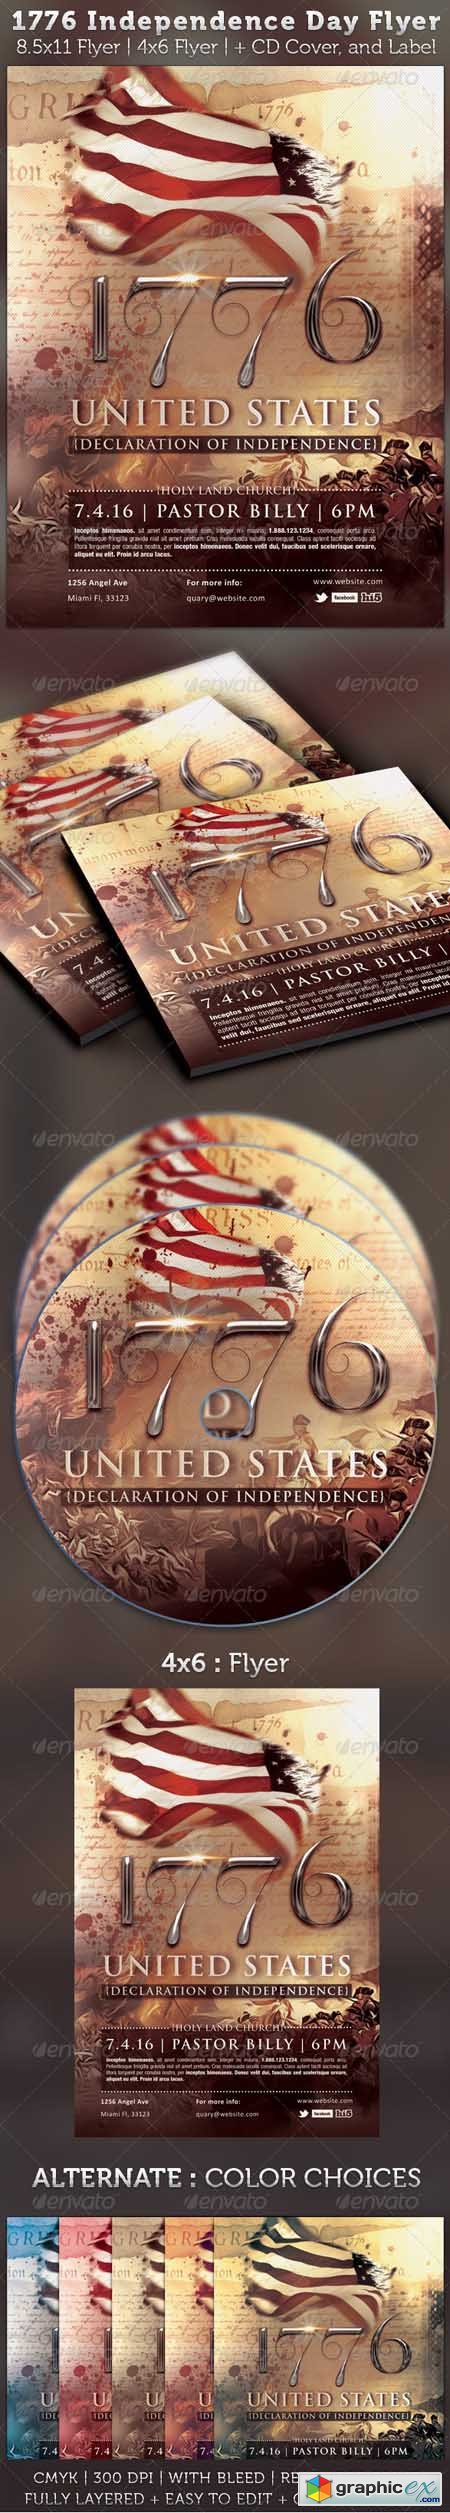 1776 Independence Day Flyer & CD Artwork Template